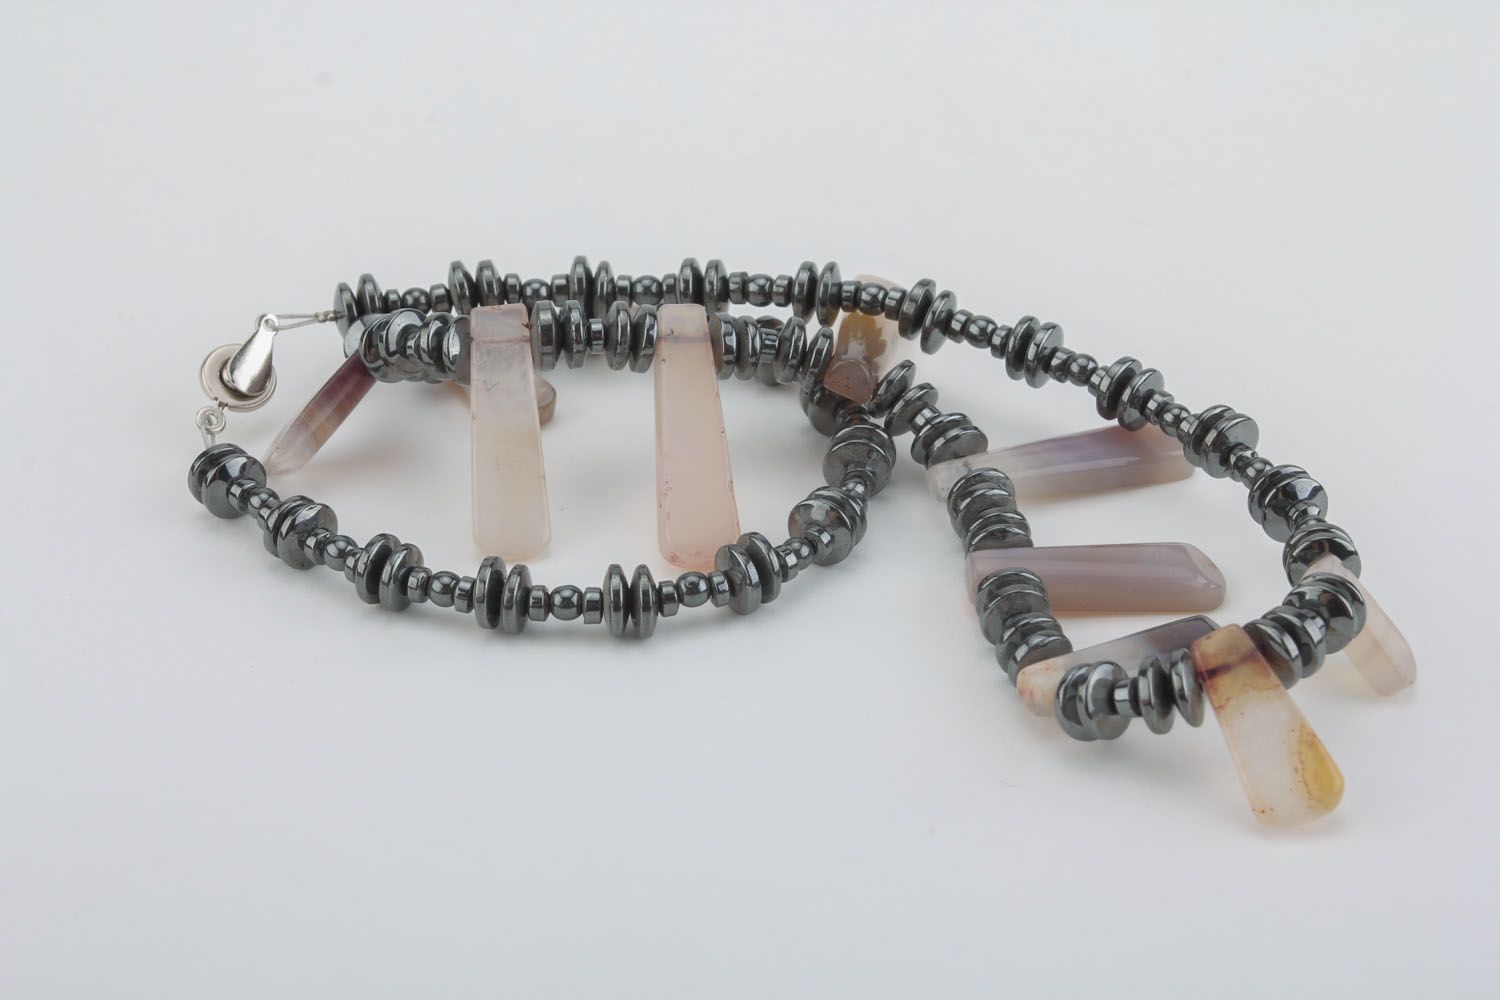 Bead necklace with natural stones in gray color palette photo 1